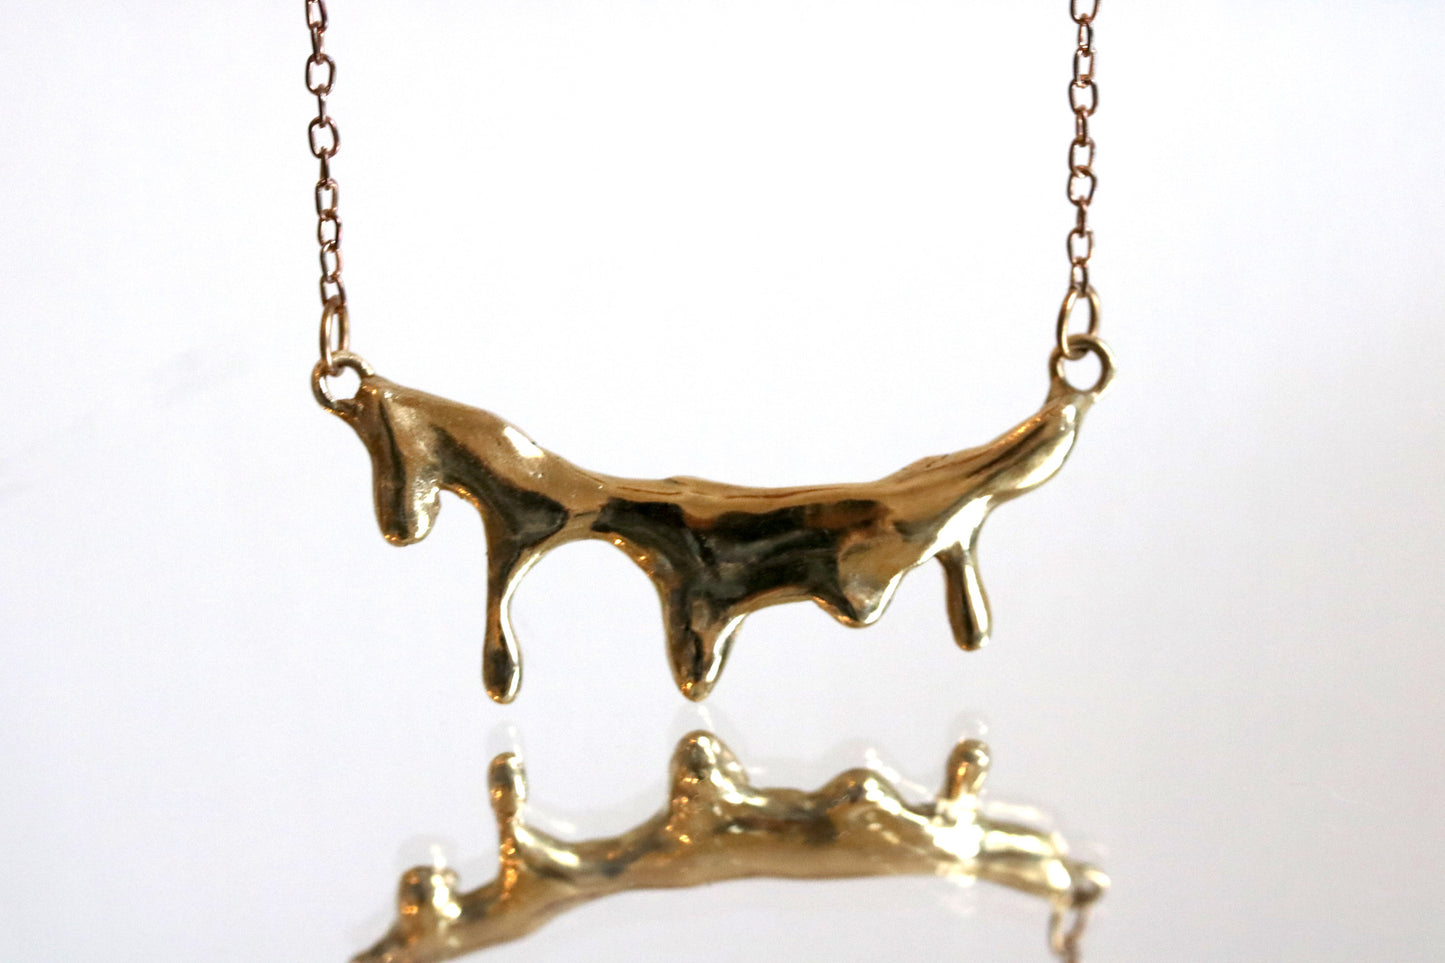 Melted Metal Stream Necklace